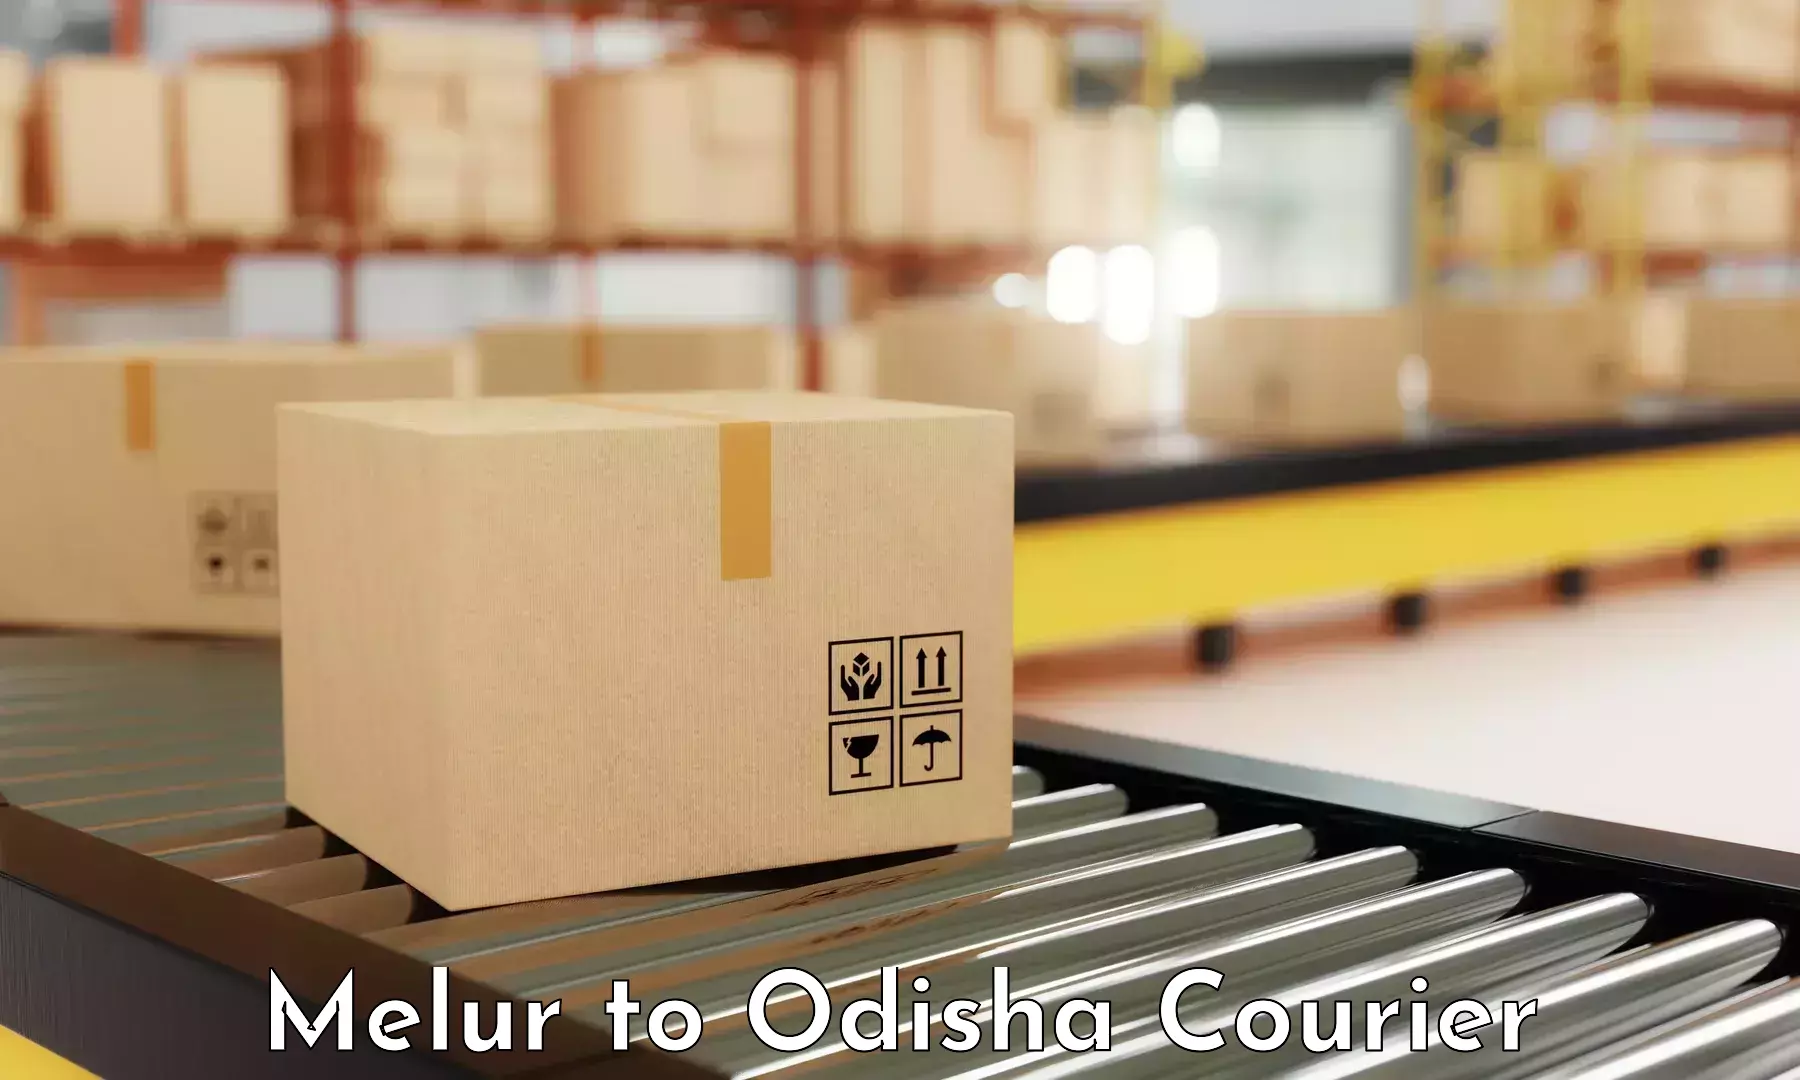 Quality courier services in Melur to Raj Berhampur